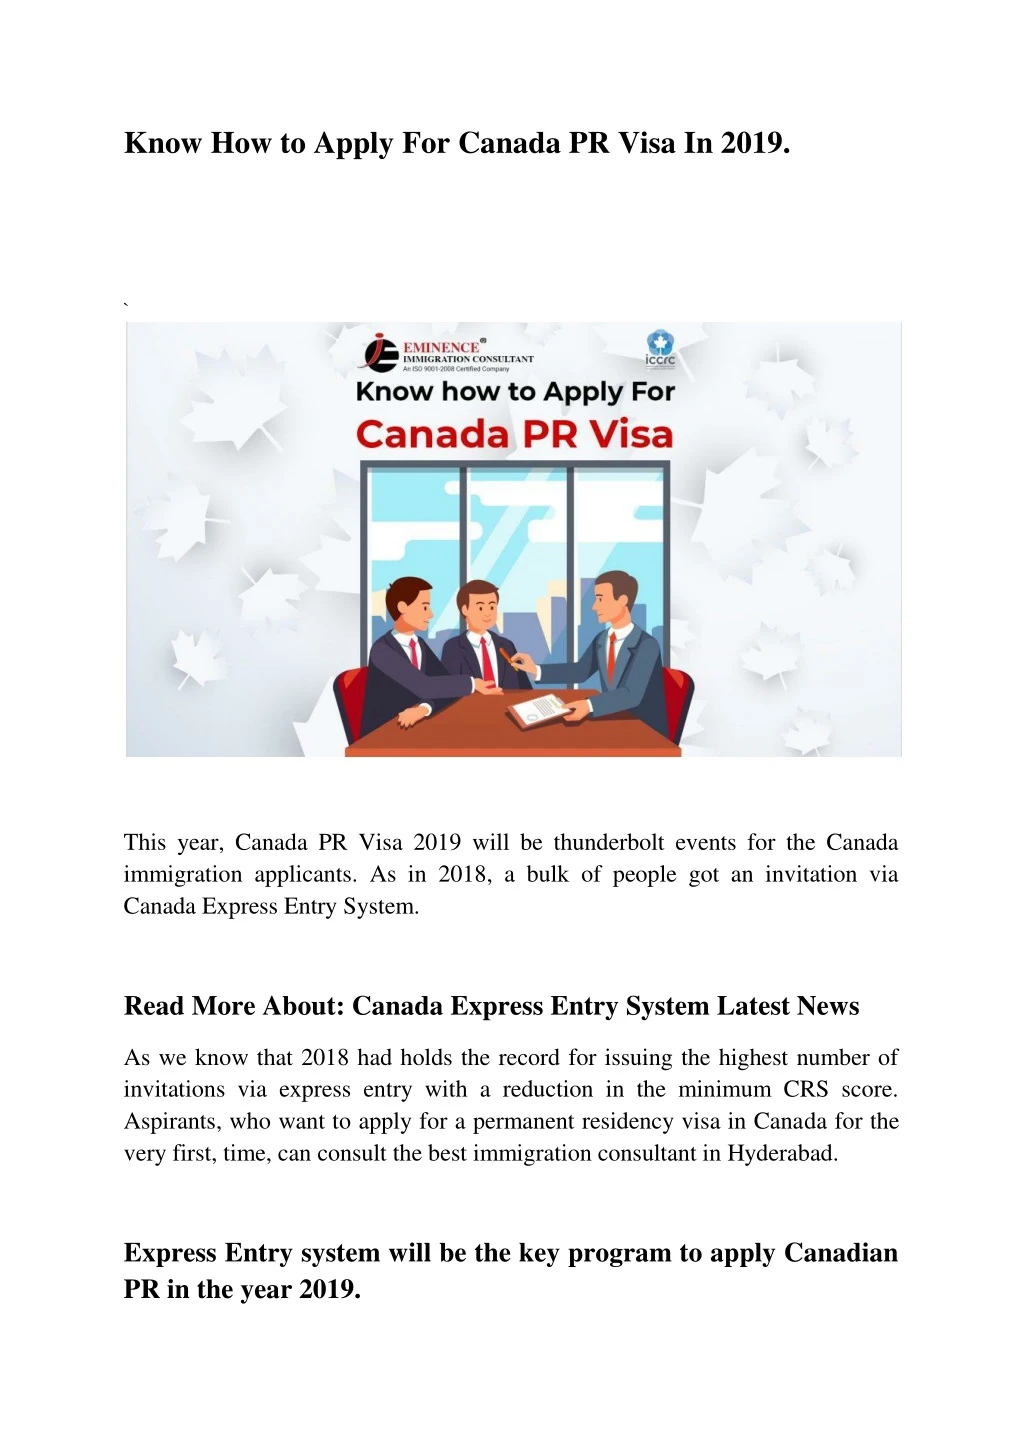 know how to apply for canada pr visa in 2019